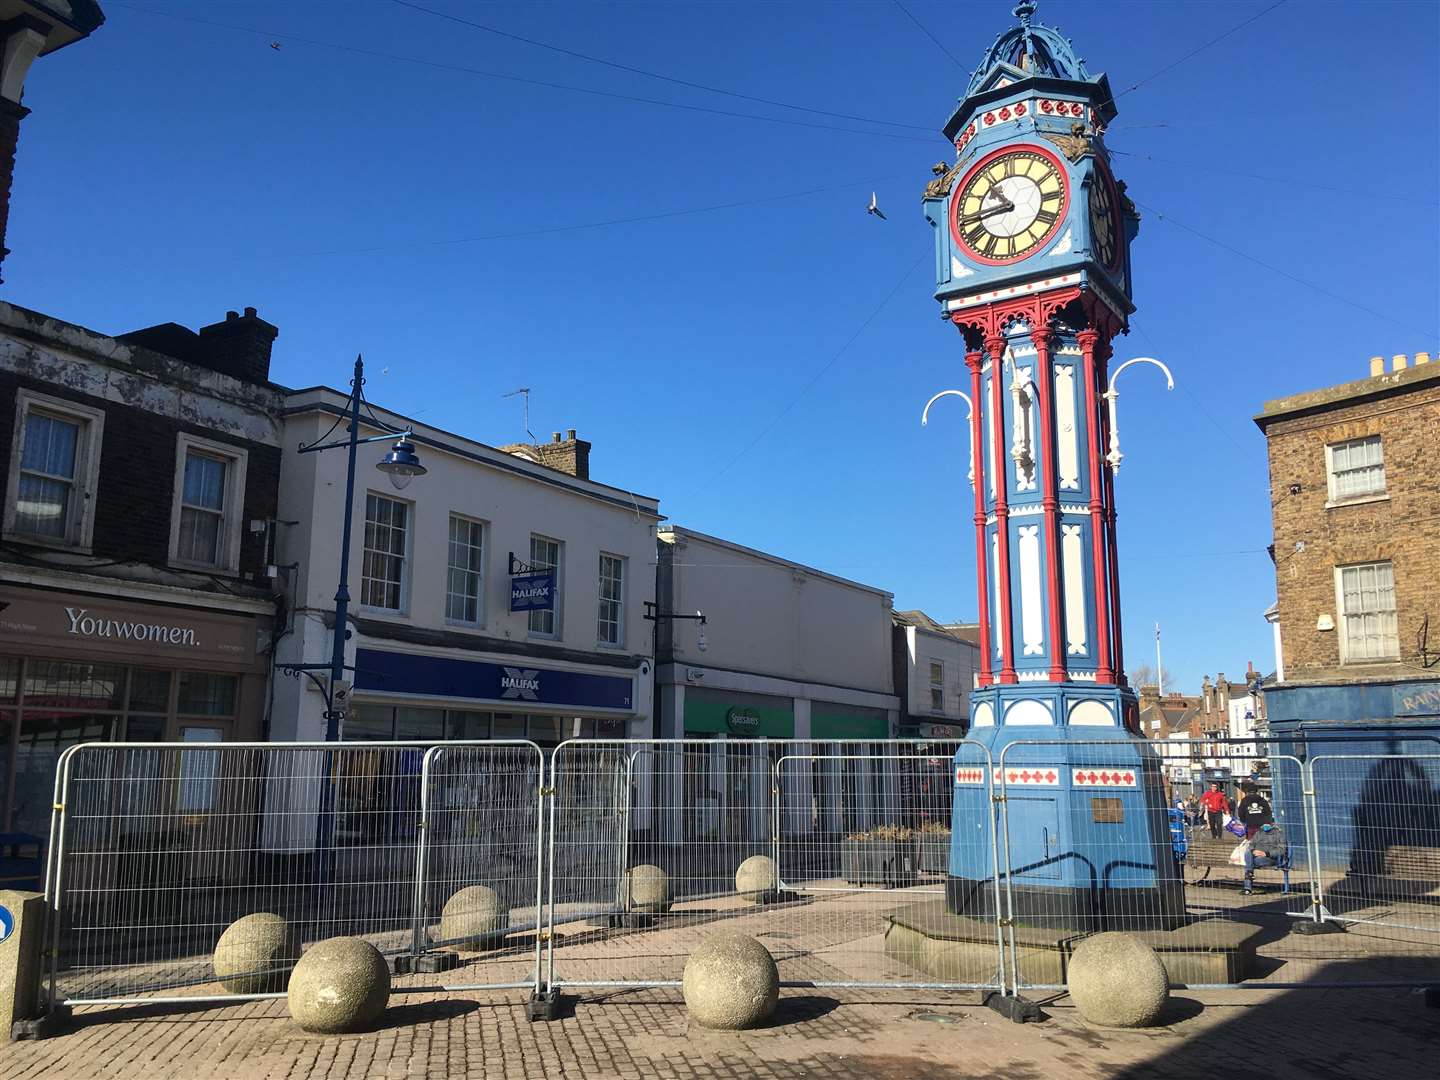 The clock tower has been blue, red and white in recent years